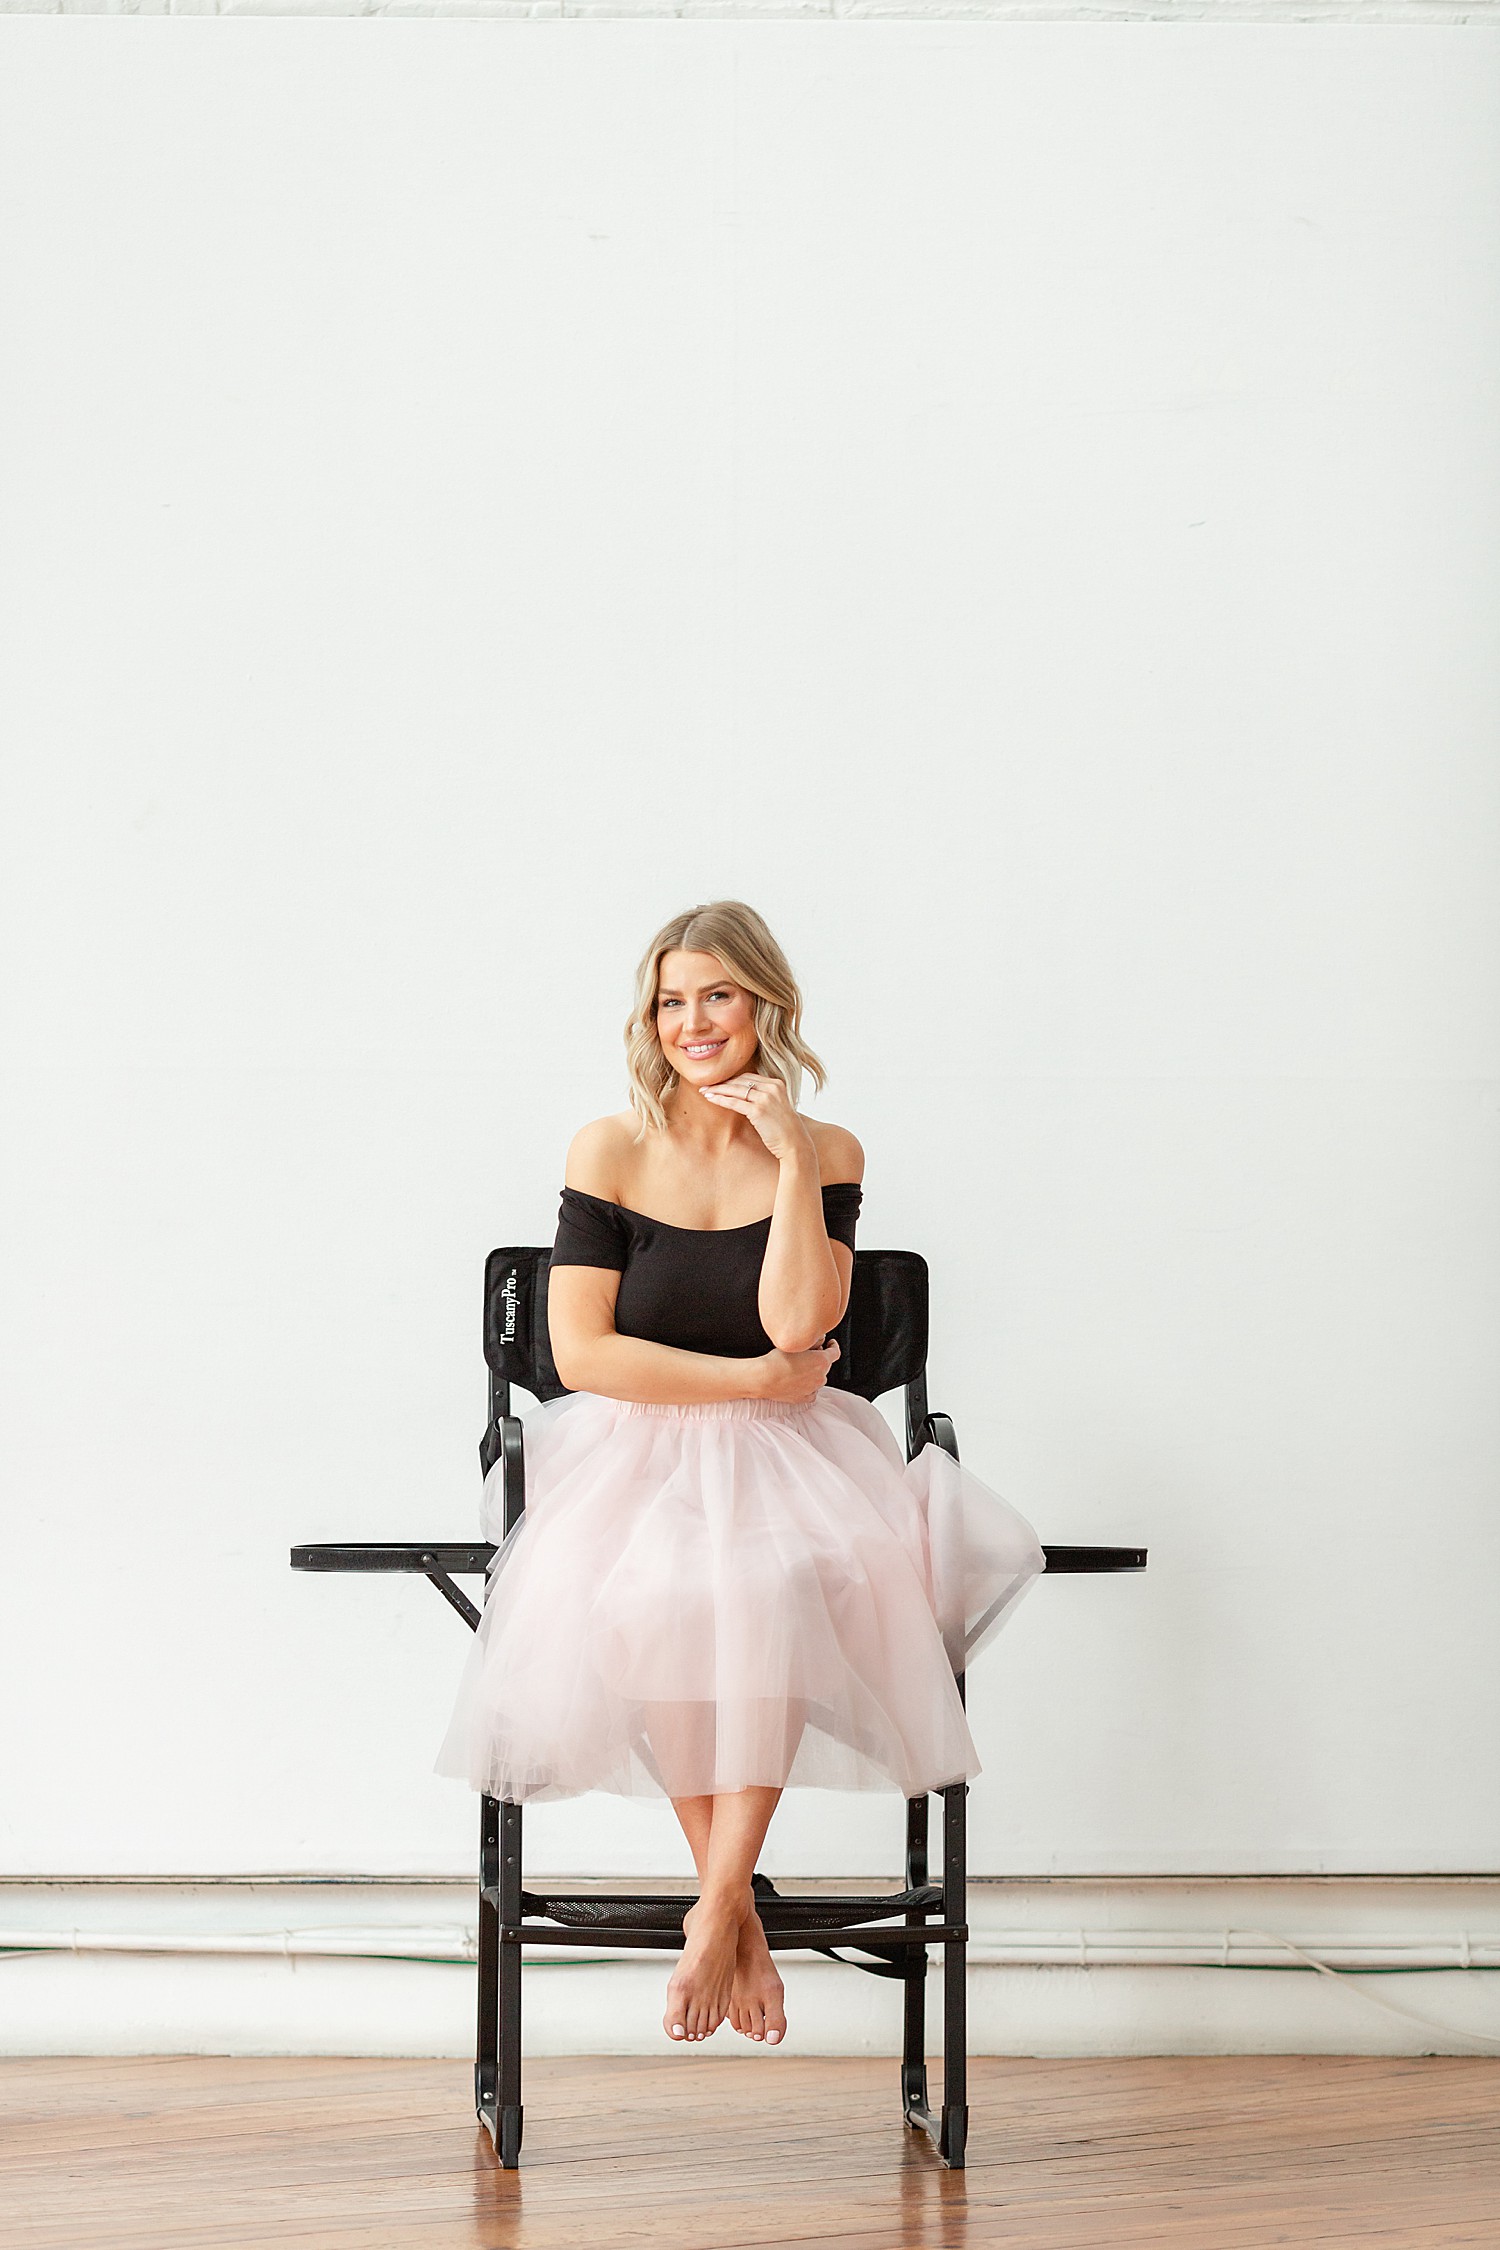 Female CEO poses in pink tutu during branding photos by Jocelyn Cruz photography